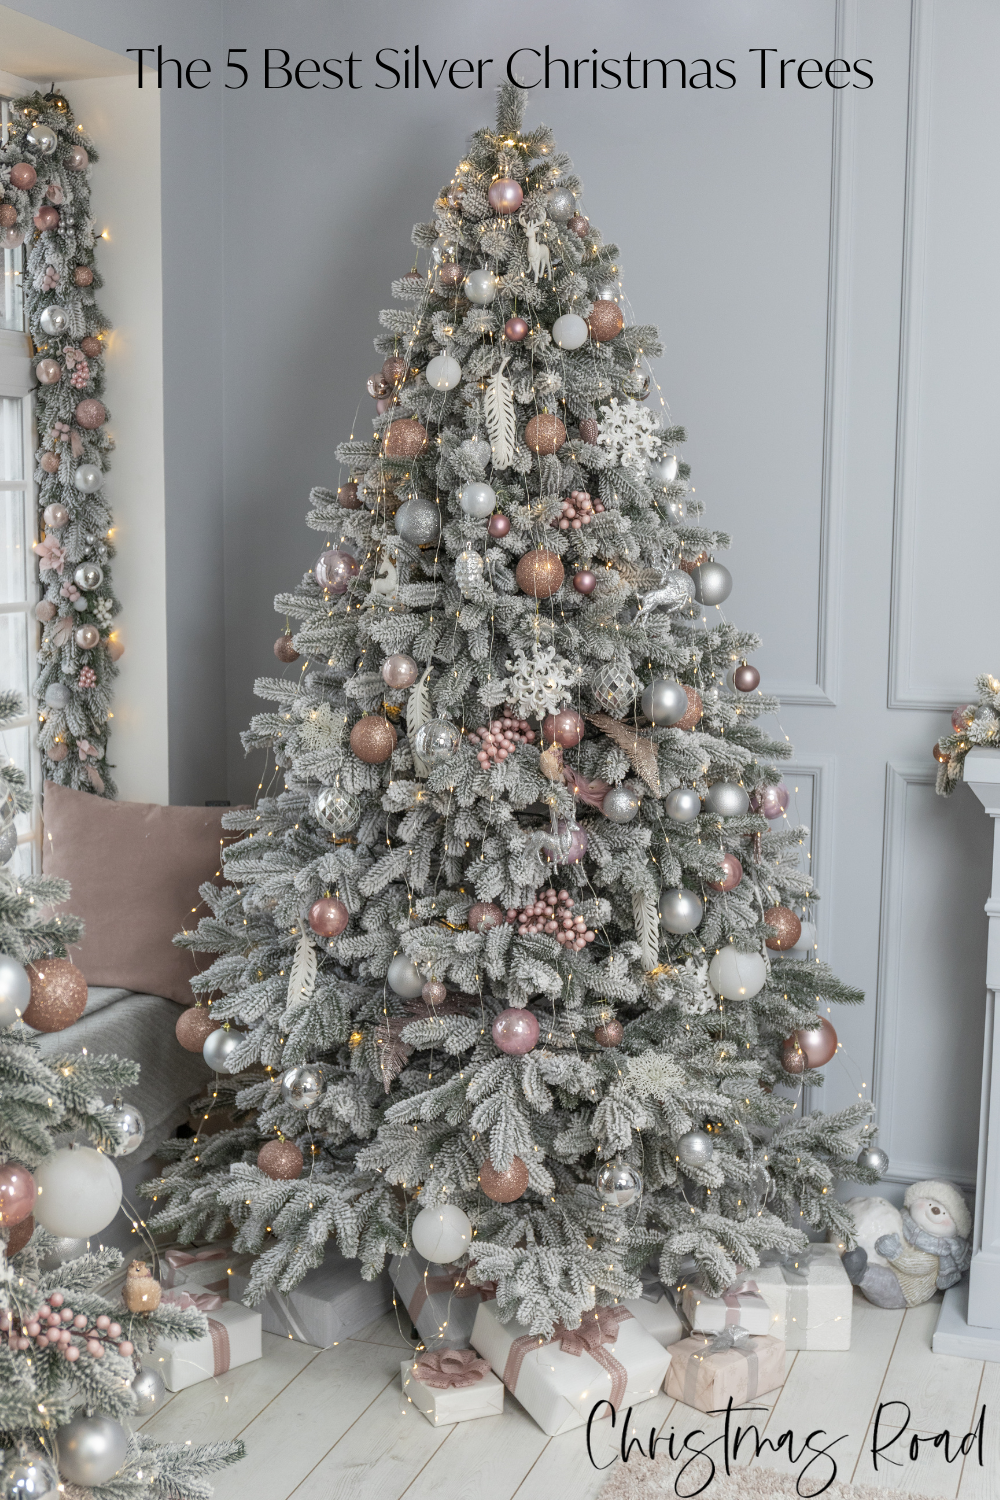 The 5 Best Silver Christmas Trees